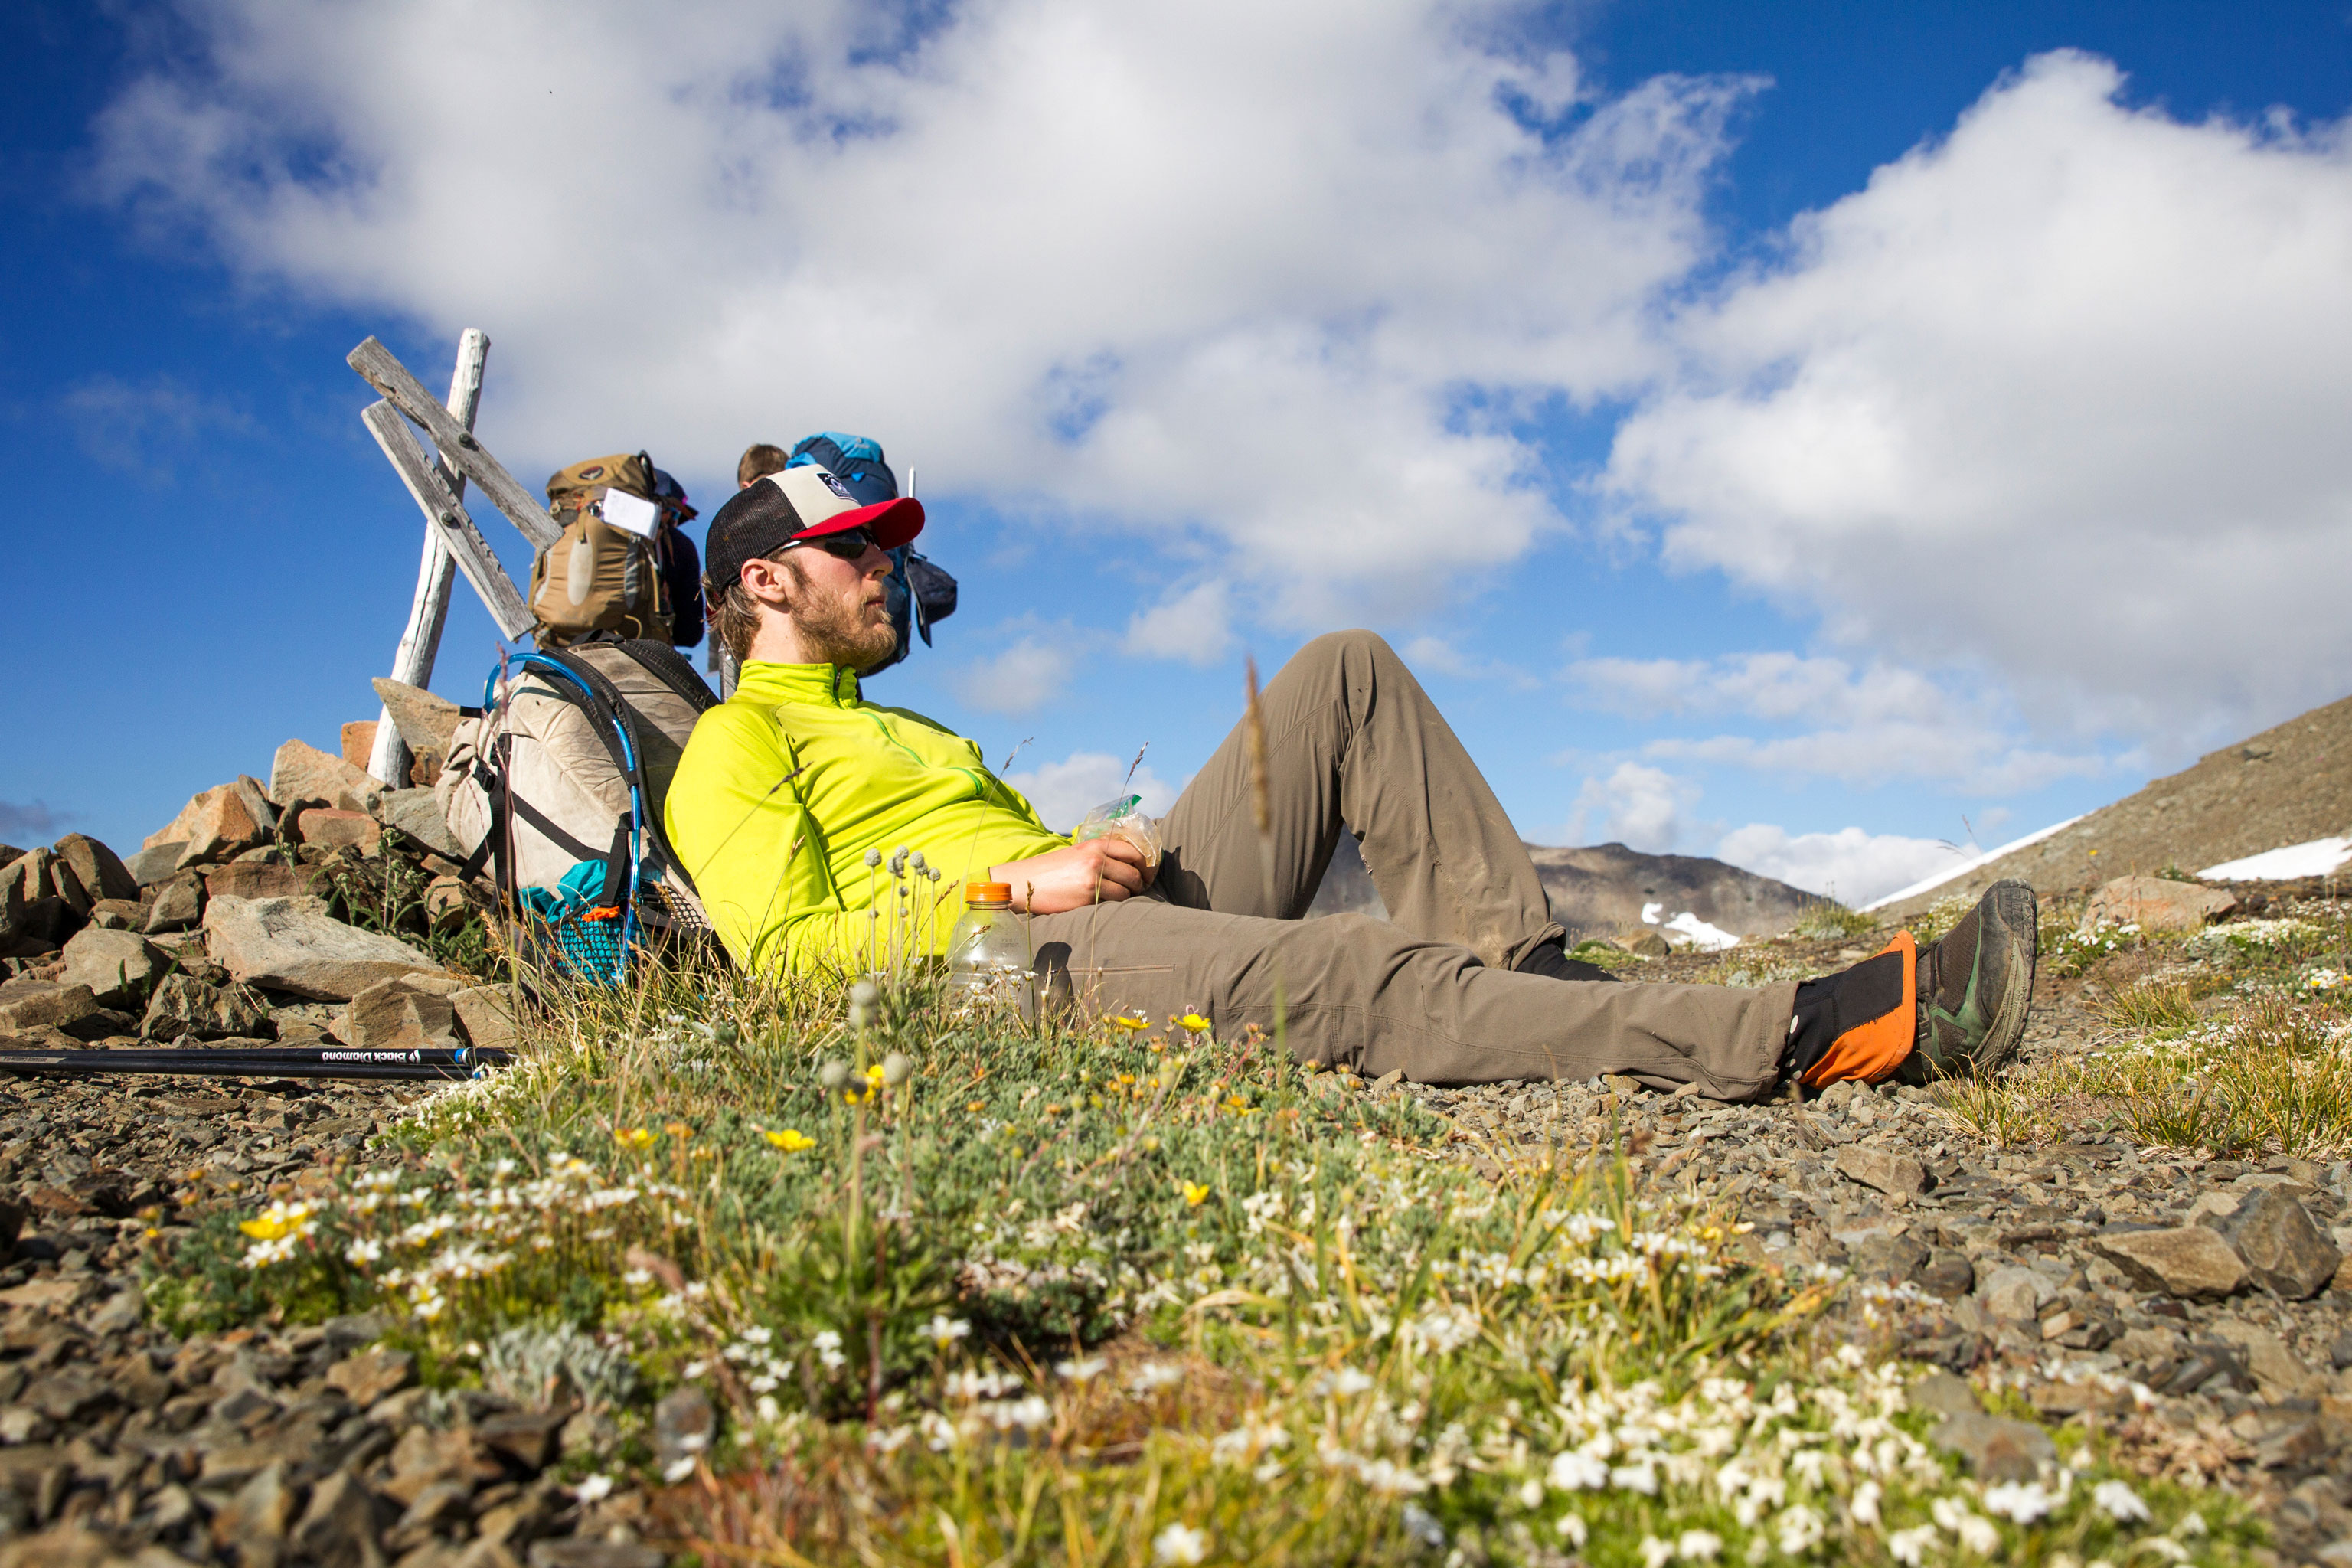 An exhausted thru-hiker sits on the ground